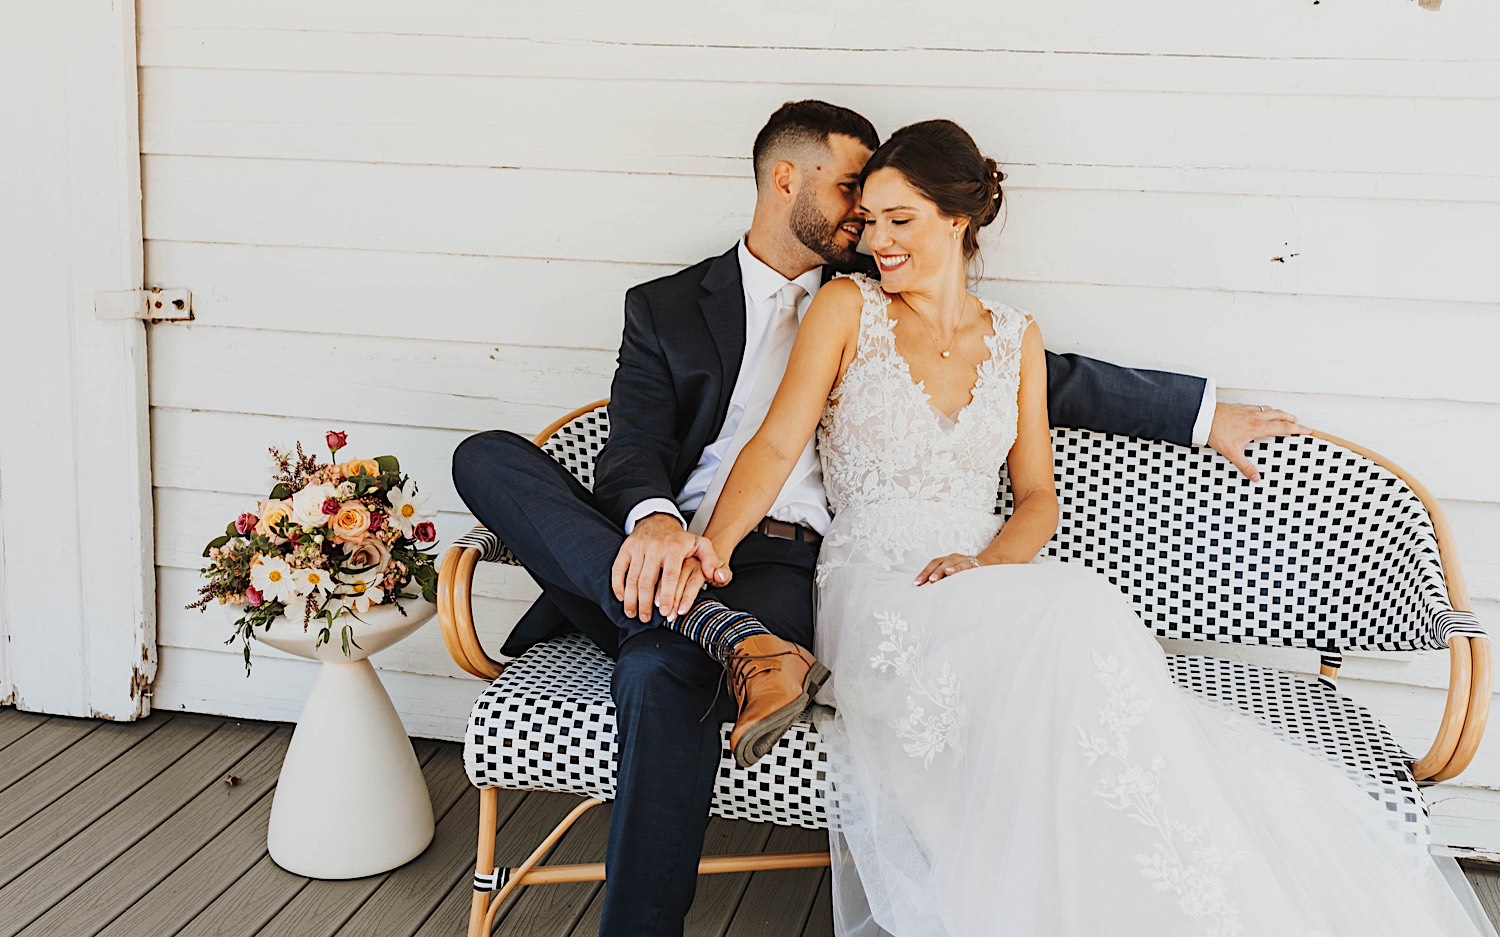 A bride and groom sit next to one another and smile on a bench outside of a house